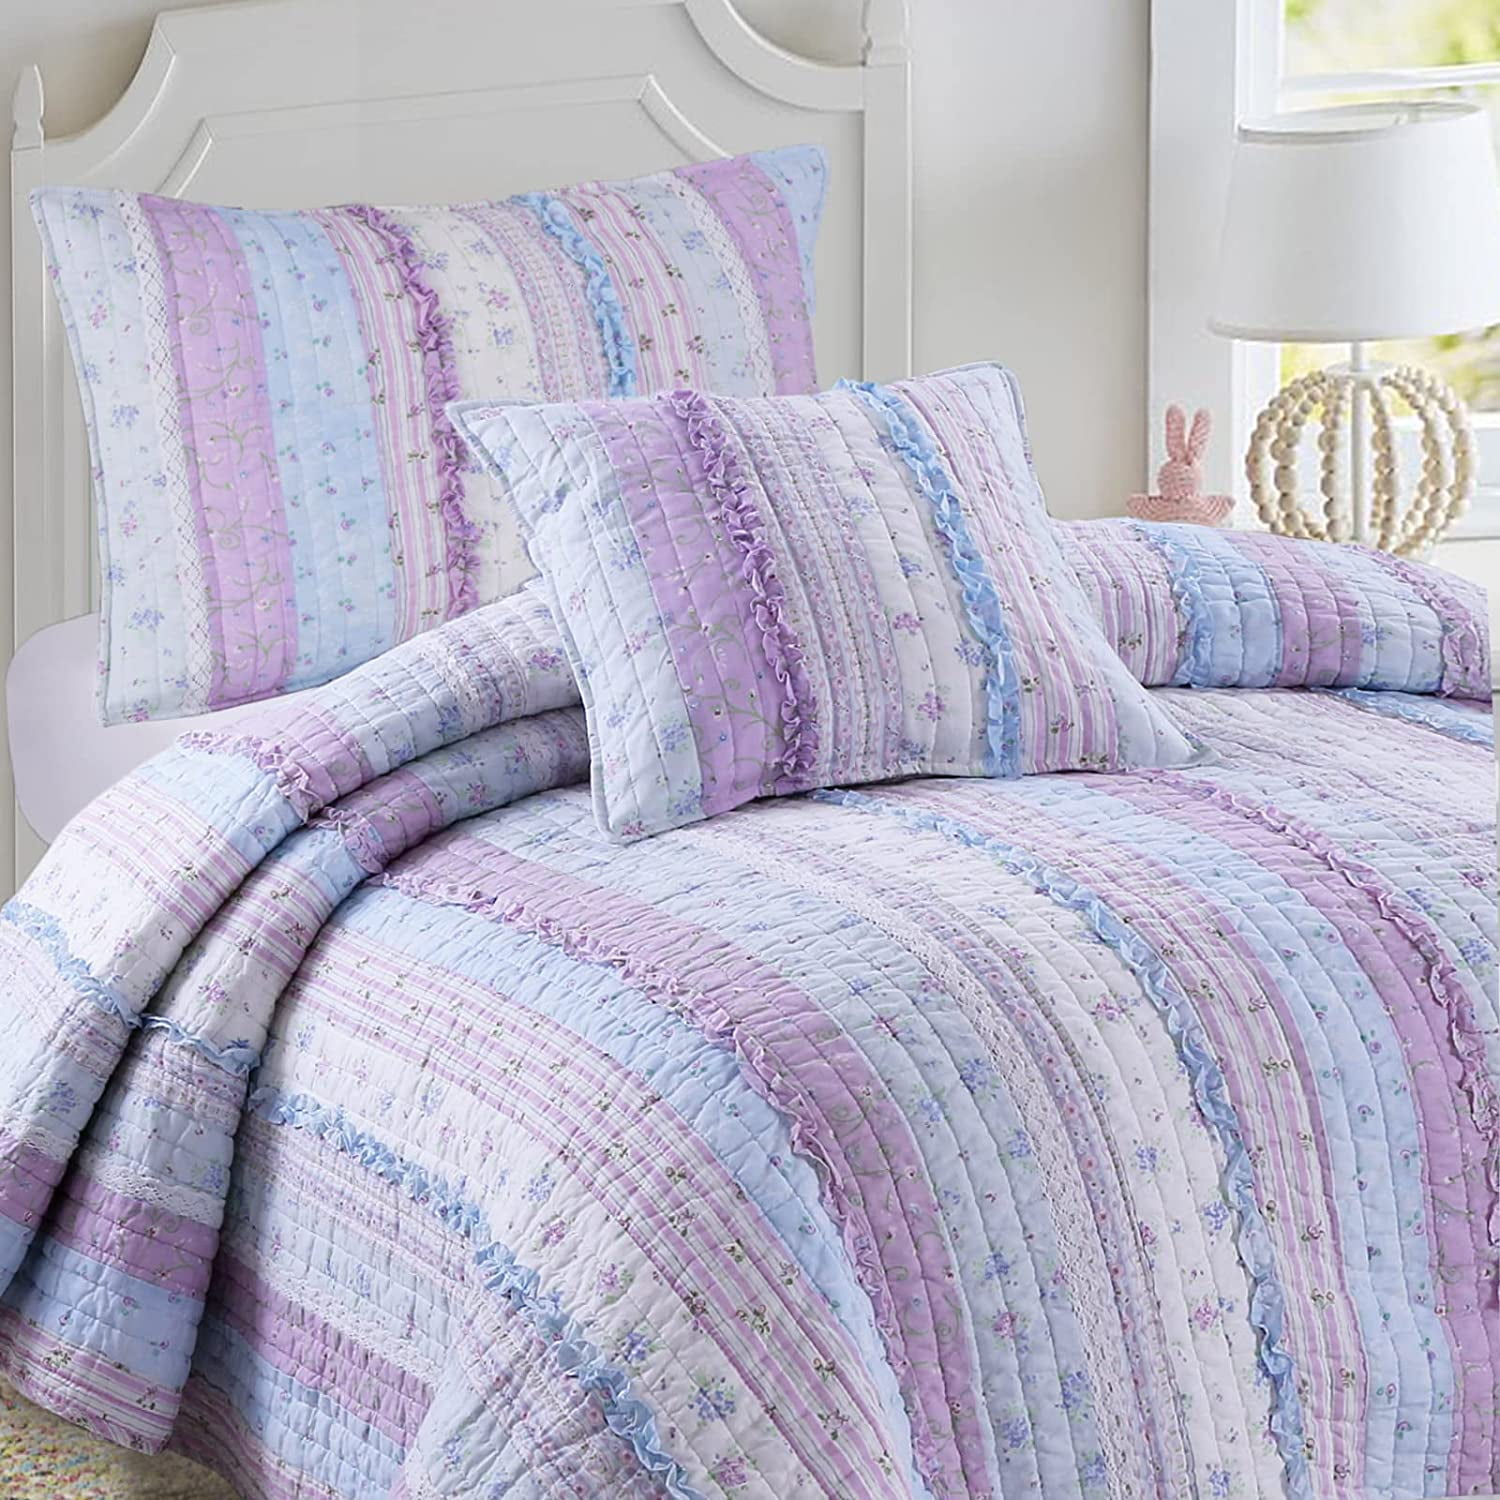 Details about   Brand New Simply Shabby Chic BLUSH BOUQUET ROSE LILAC TWIN 2 PIECE COMFORTER SET 